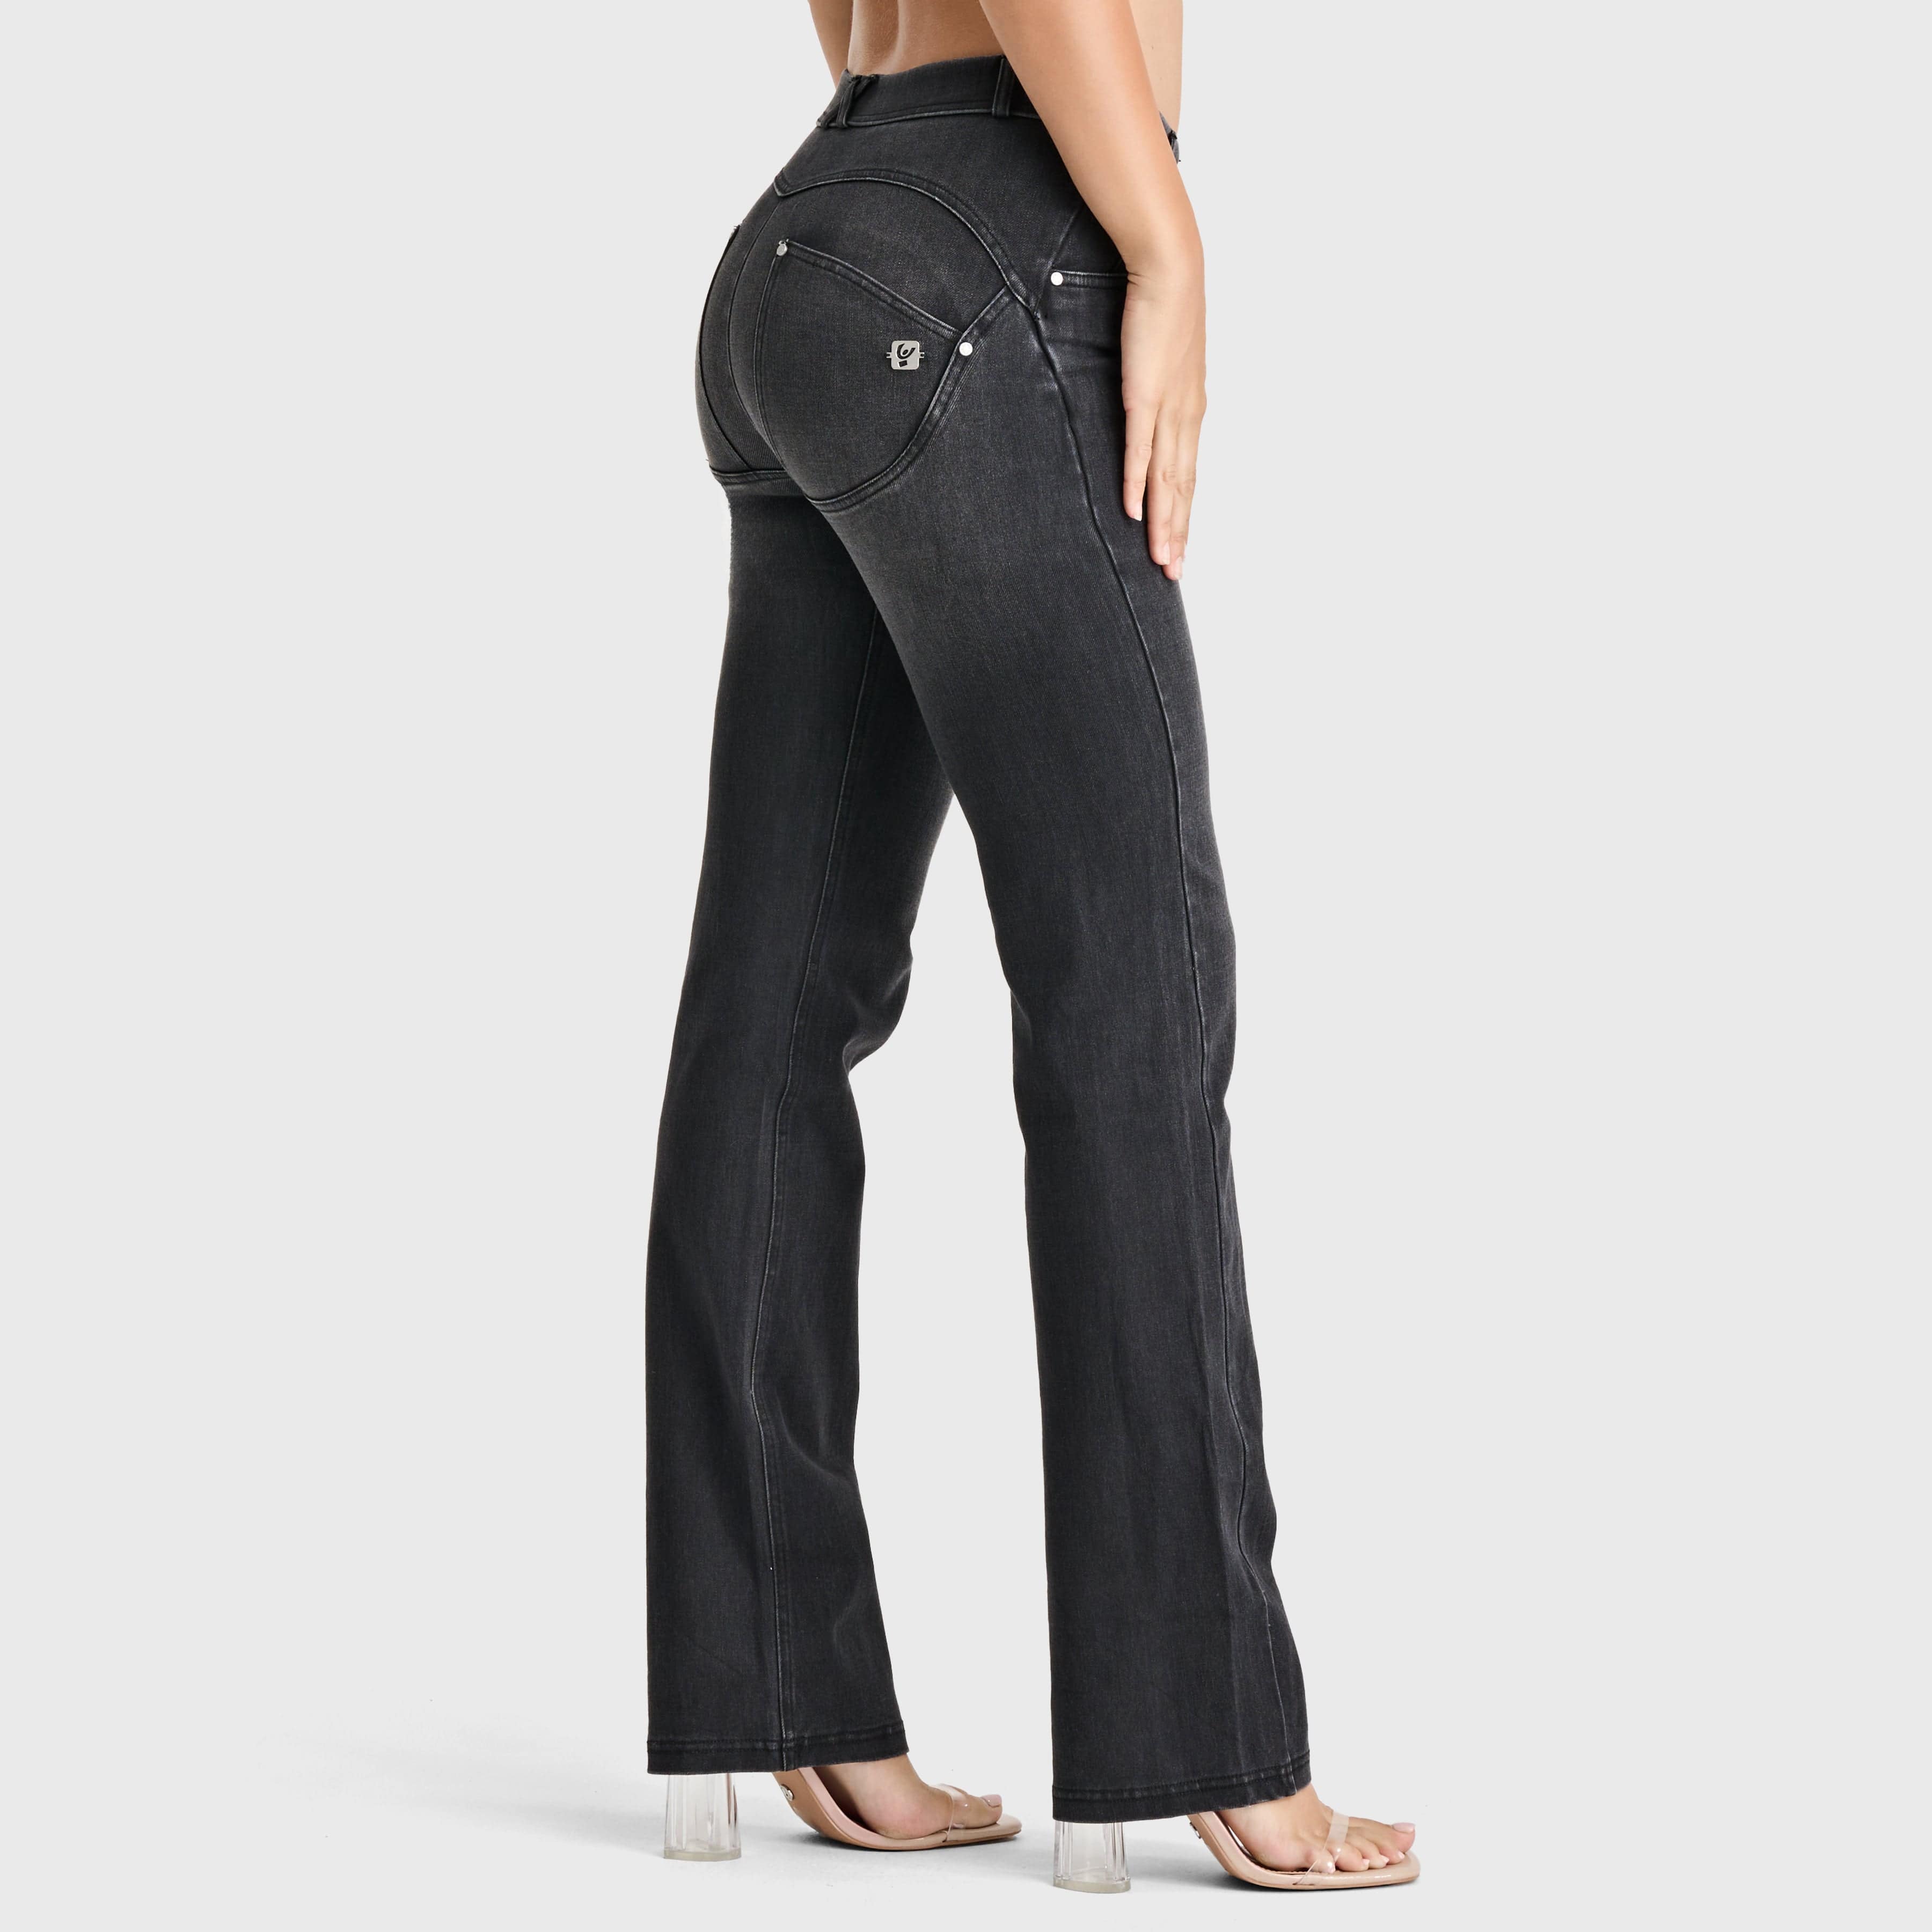 WR.UP® Snug Jeans - 2 Button High Waisted - Bootcut - Black + Black Stitching 1